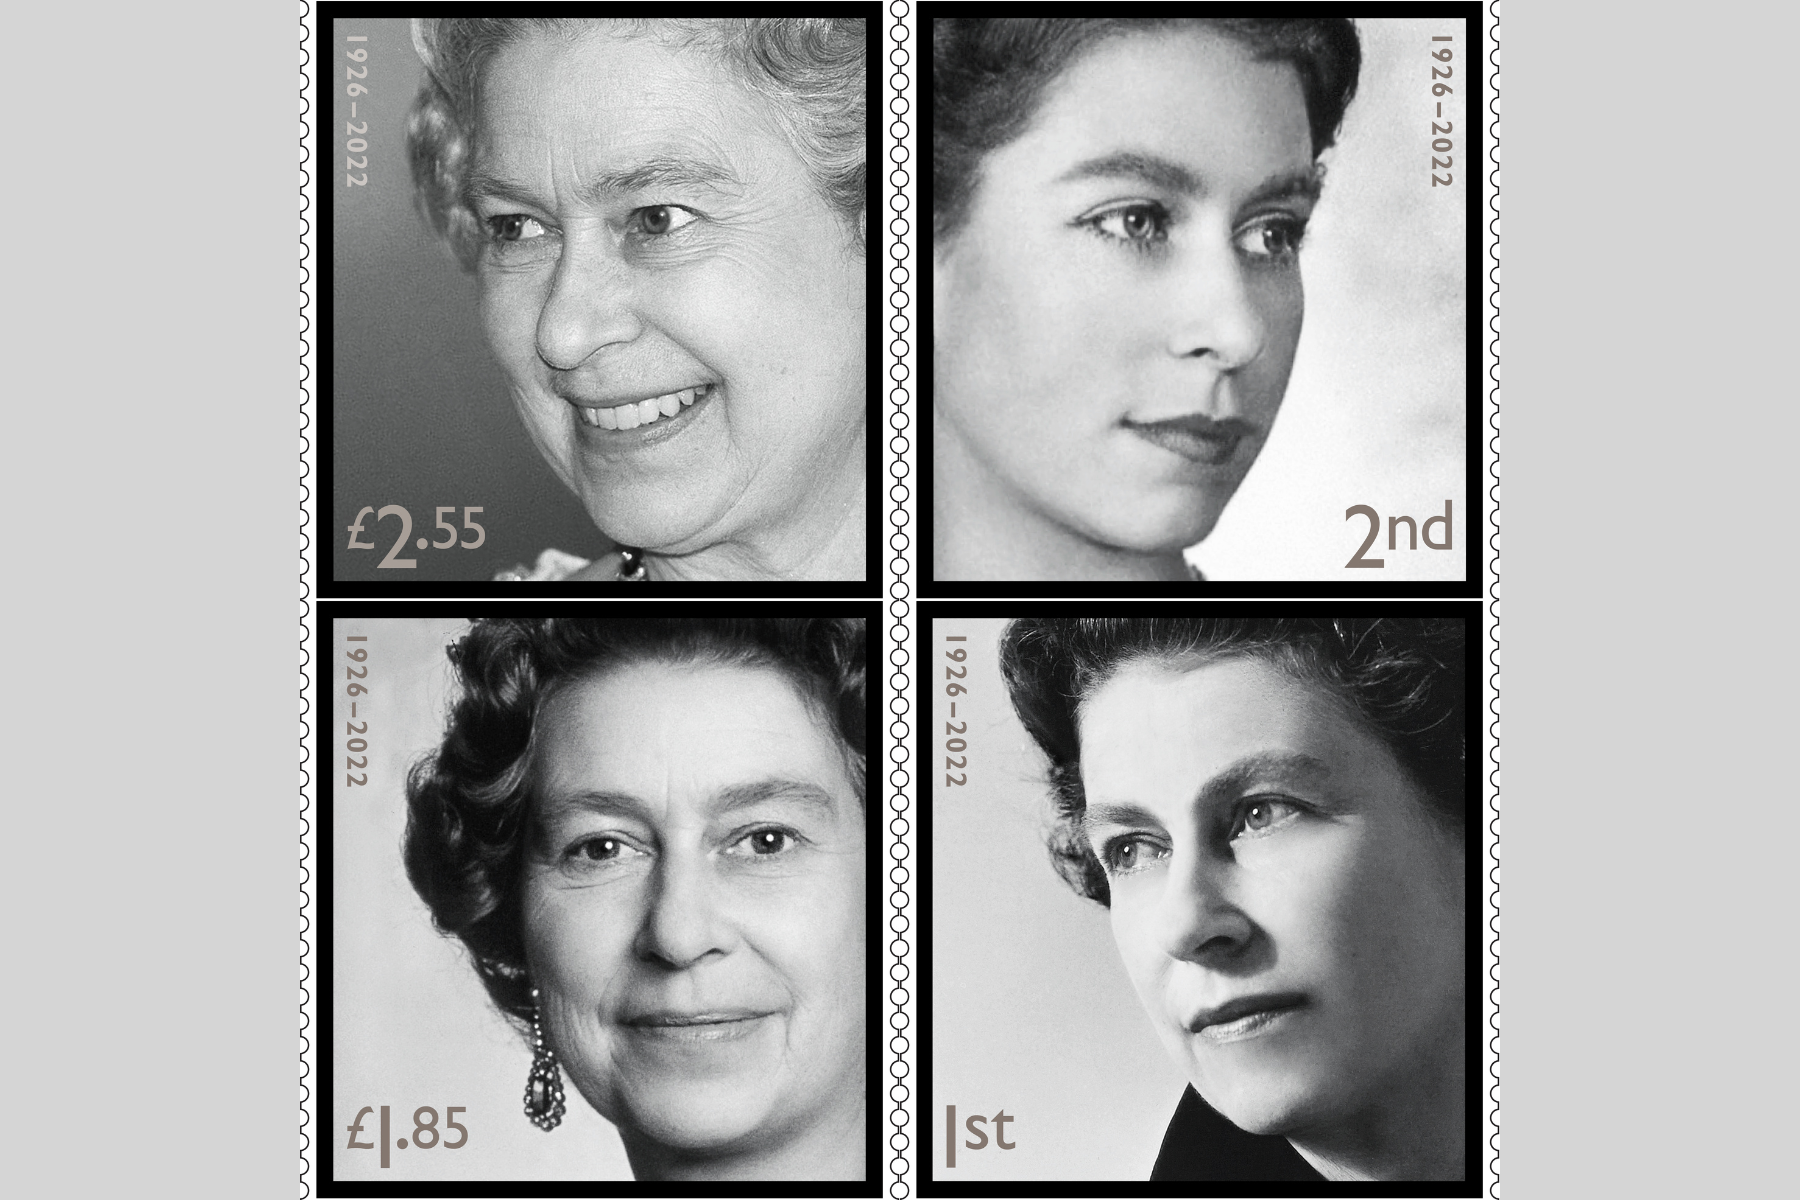 Royal Mail to release special stamps in memory of Queen Elizabeth II